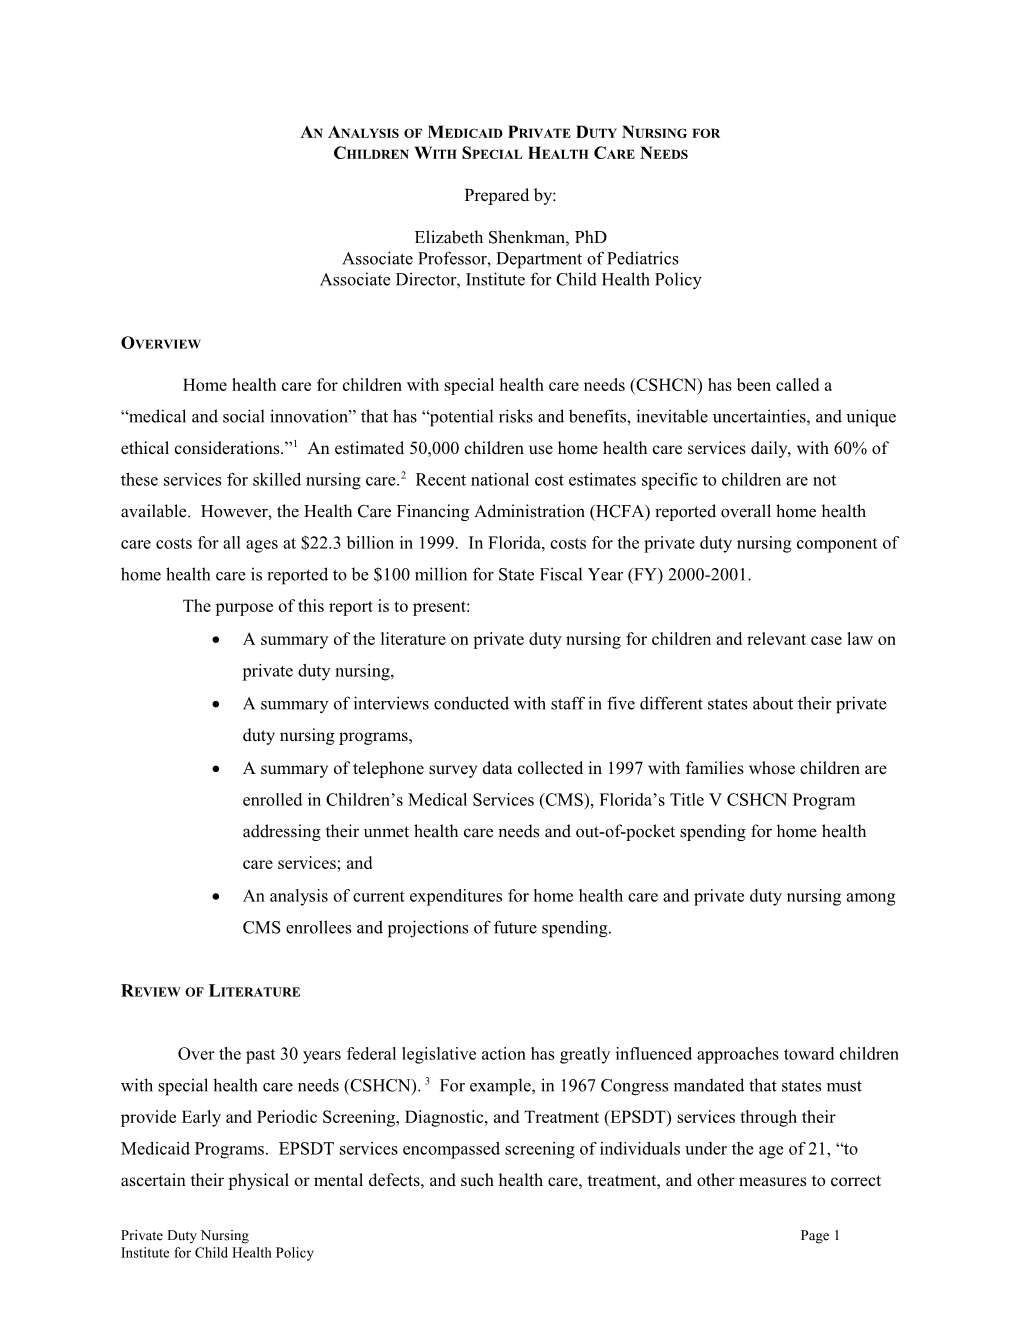 Project Overview: an Analysis of Medicaid Private Duty Nursing For